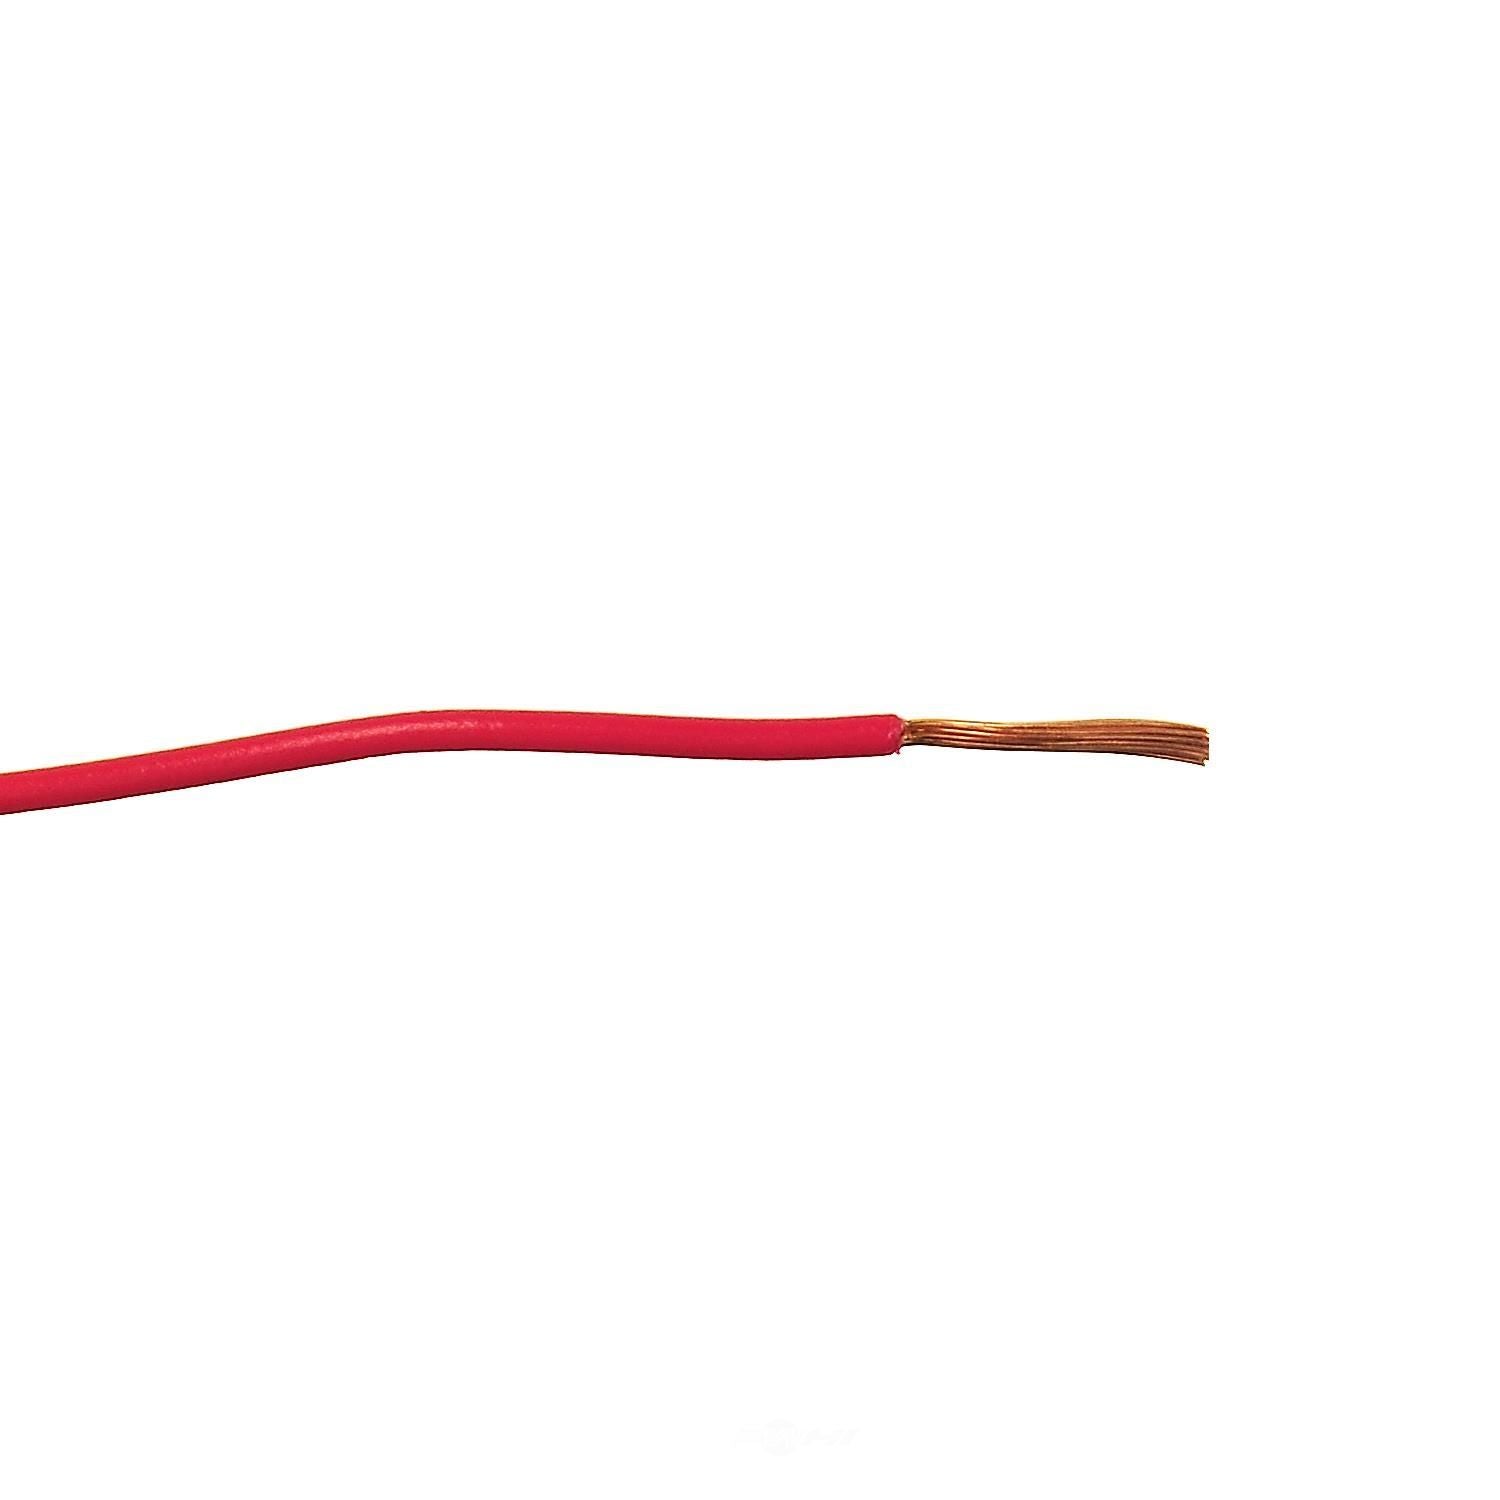 YSP WR8RD-100 Wells Bulk Primary Wire (Red, 22G)